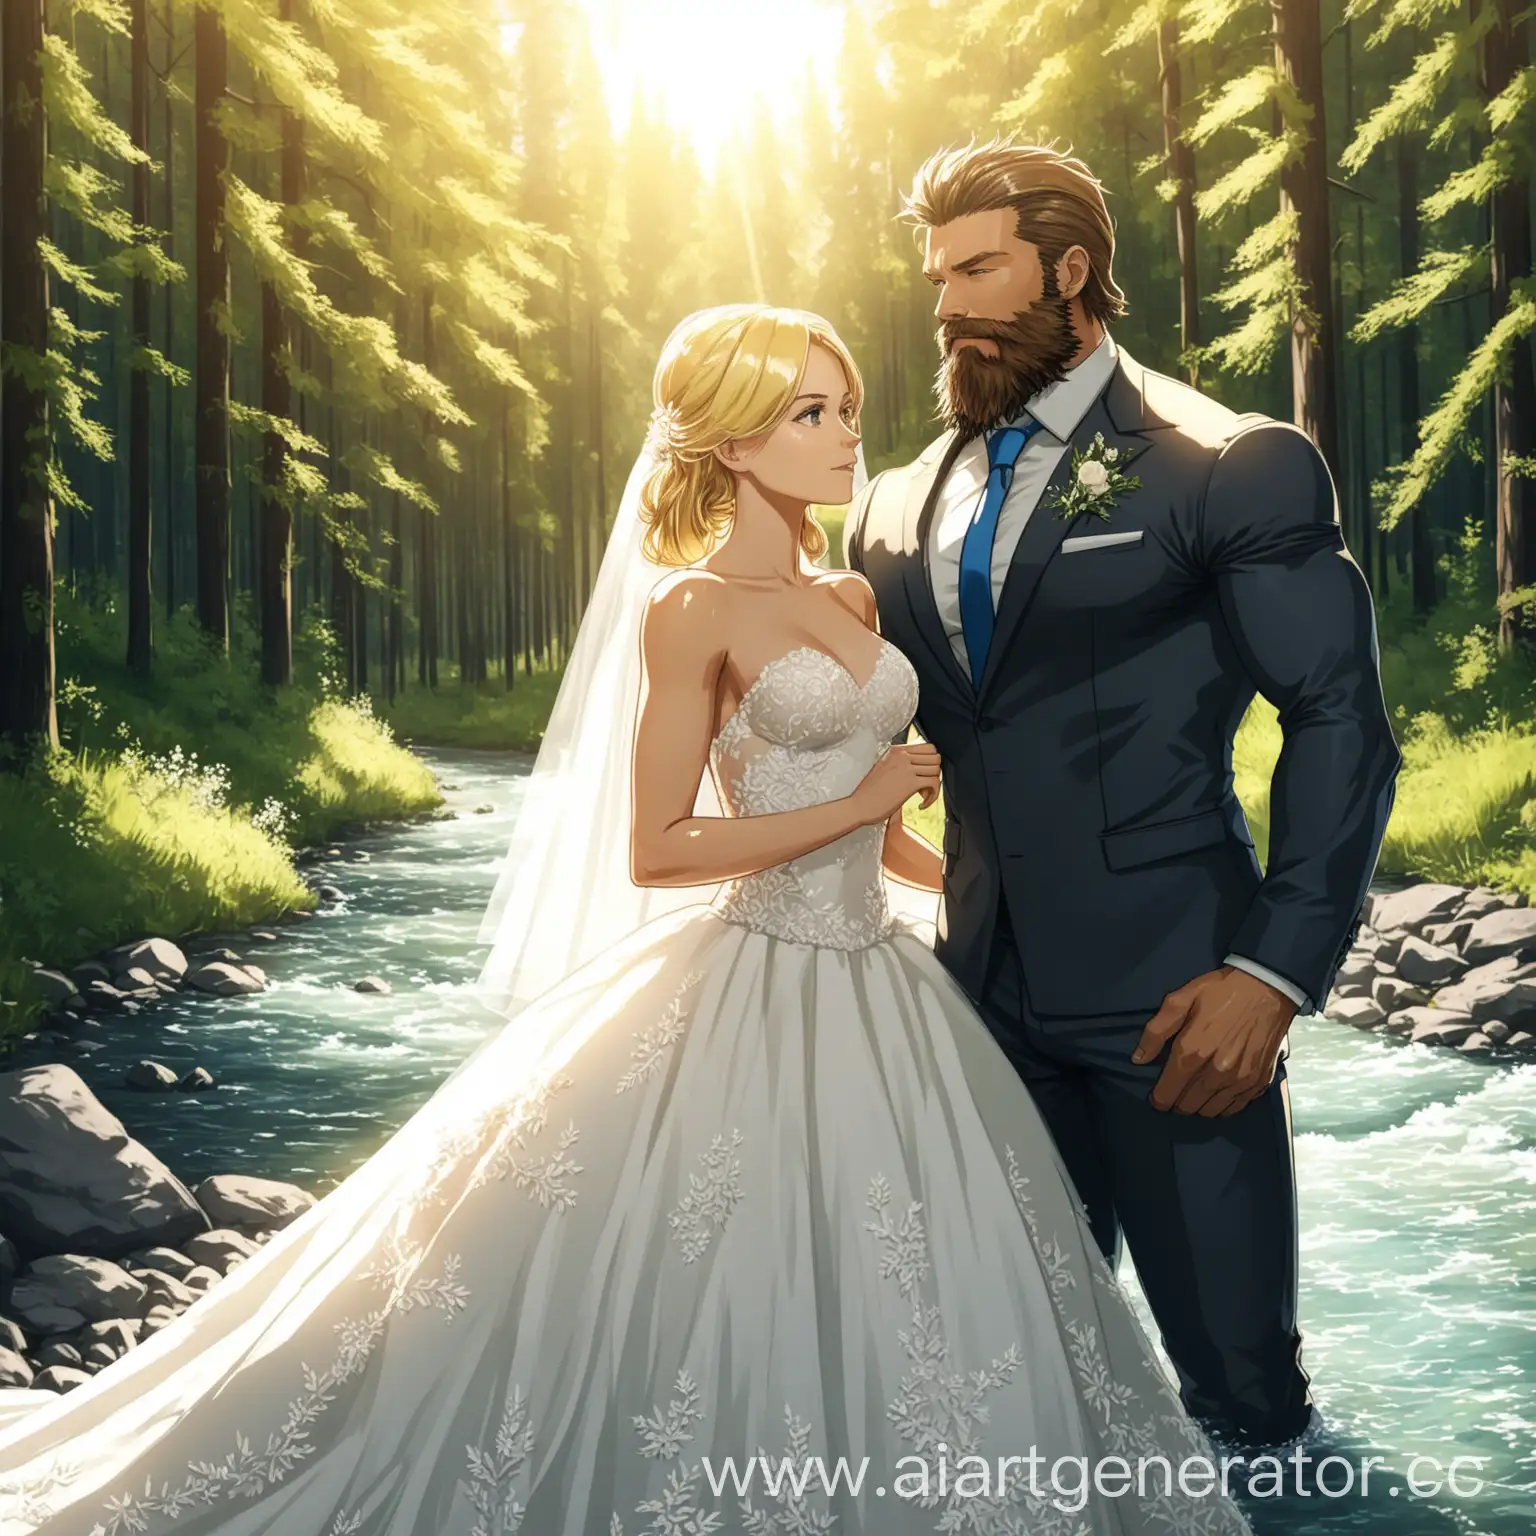 river, forest, sunny, blonde girl in a wedding dress, brunette muscular man with a beard in a suit